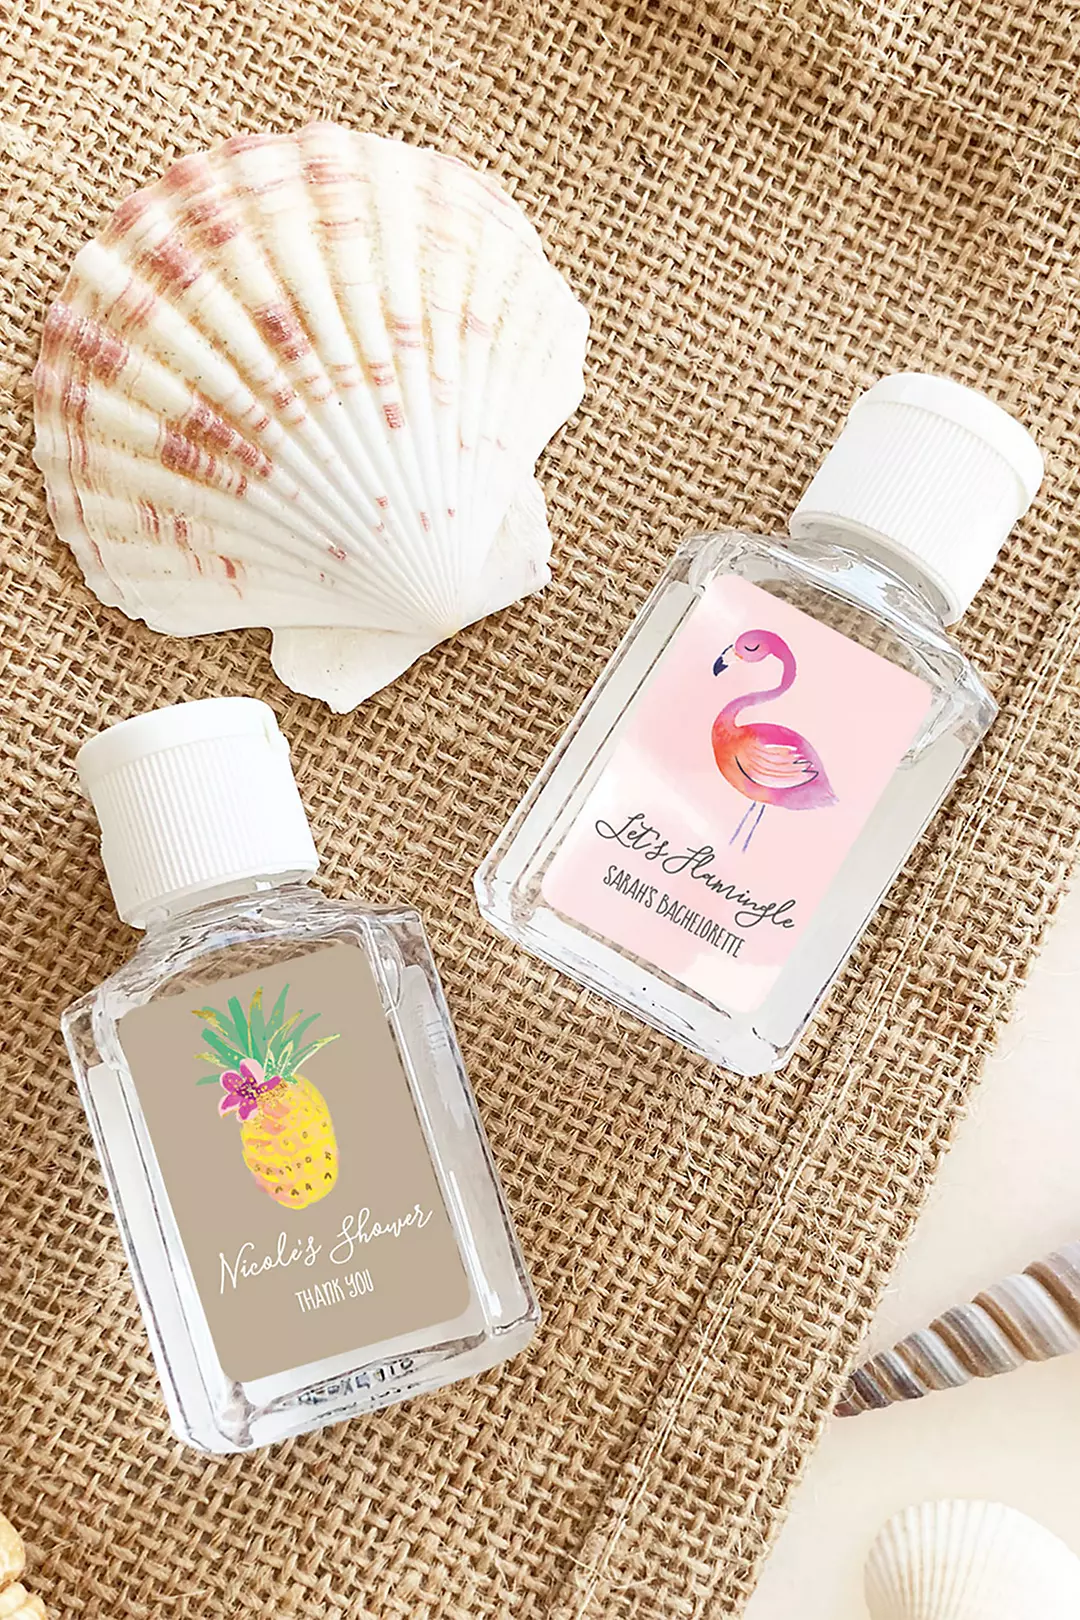 Personalized Beach Theme Hand Sanitizer Favors Image 2